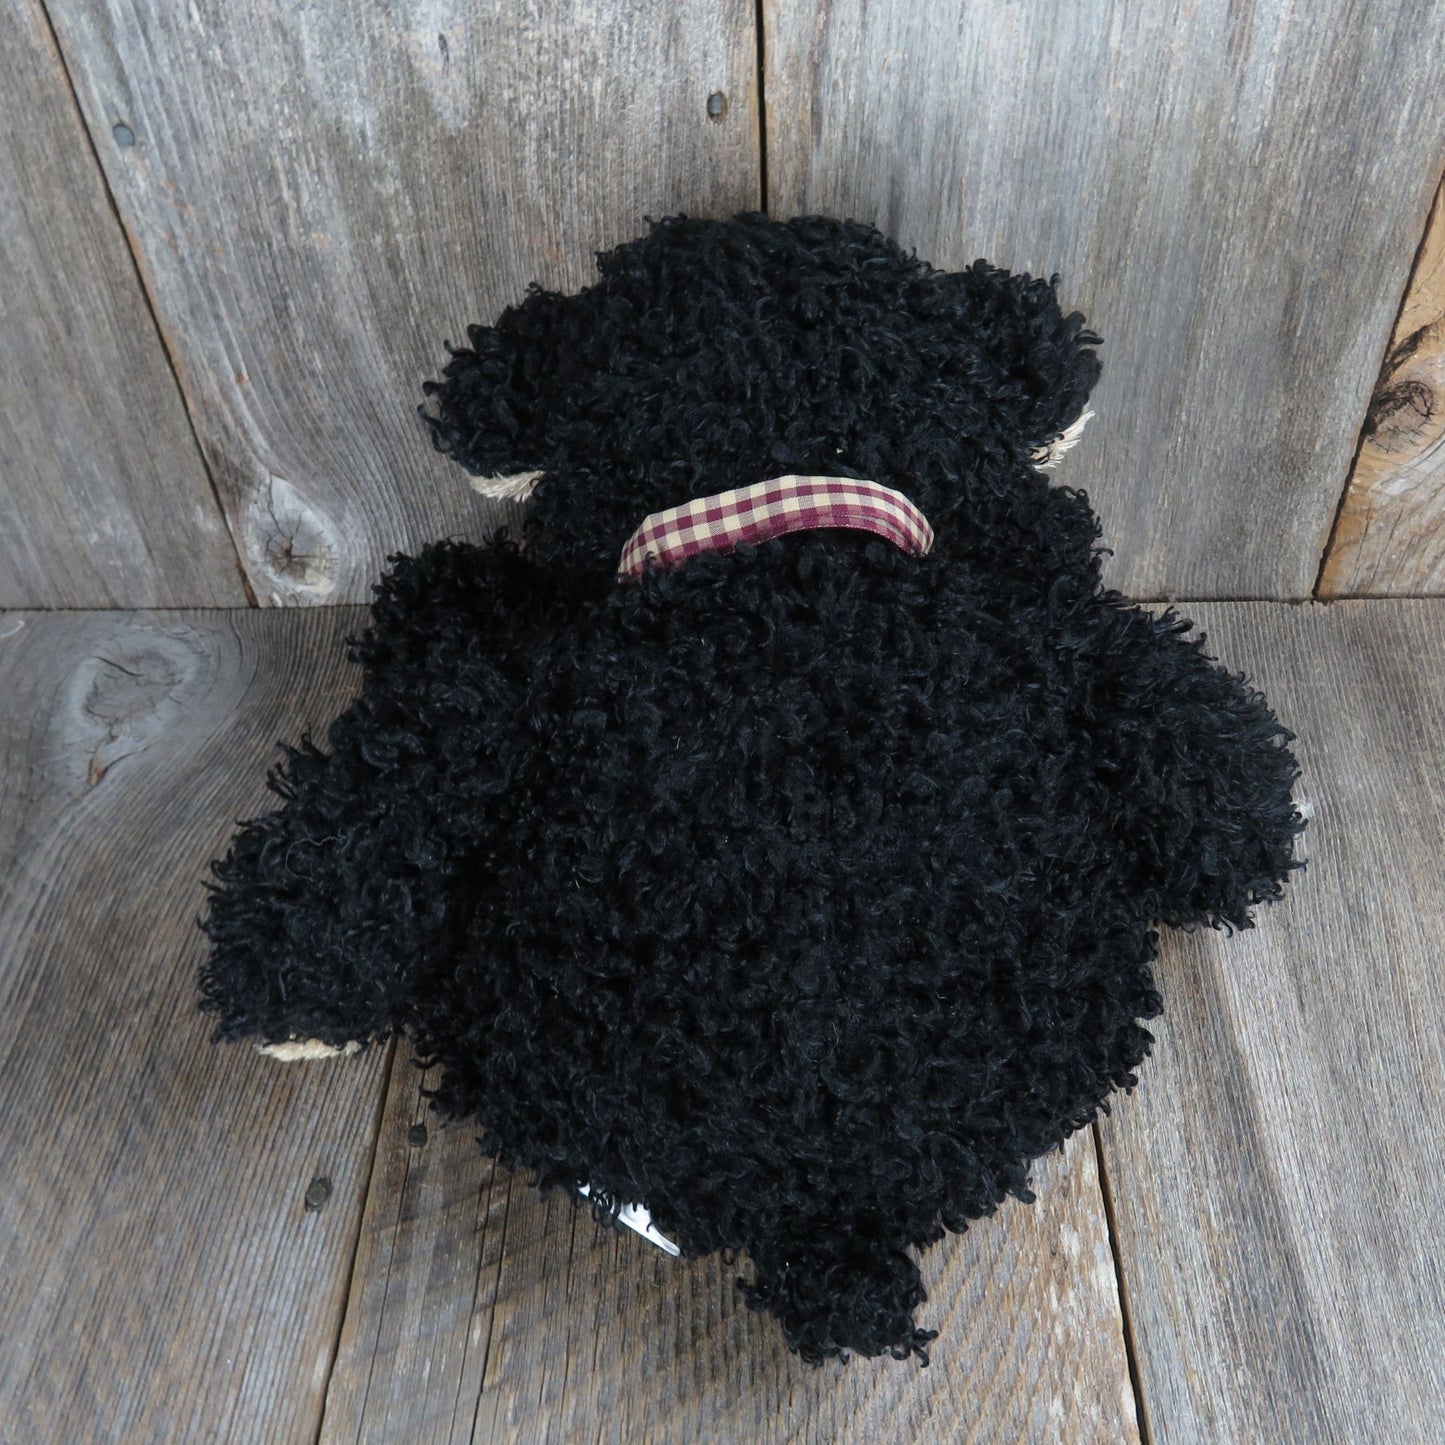 Black Curly Haired Teddy Bear Plush Brown Face Ears and Paws Checkered Bow CalPlush Stuffed Animal